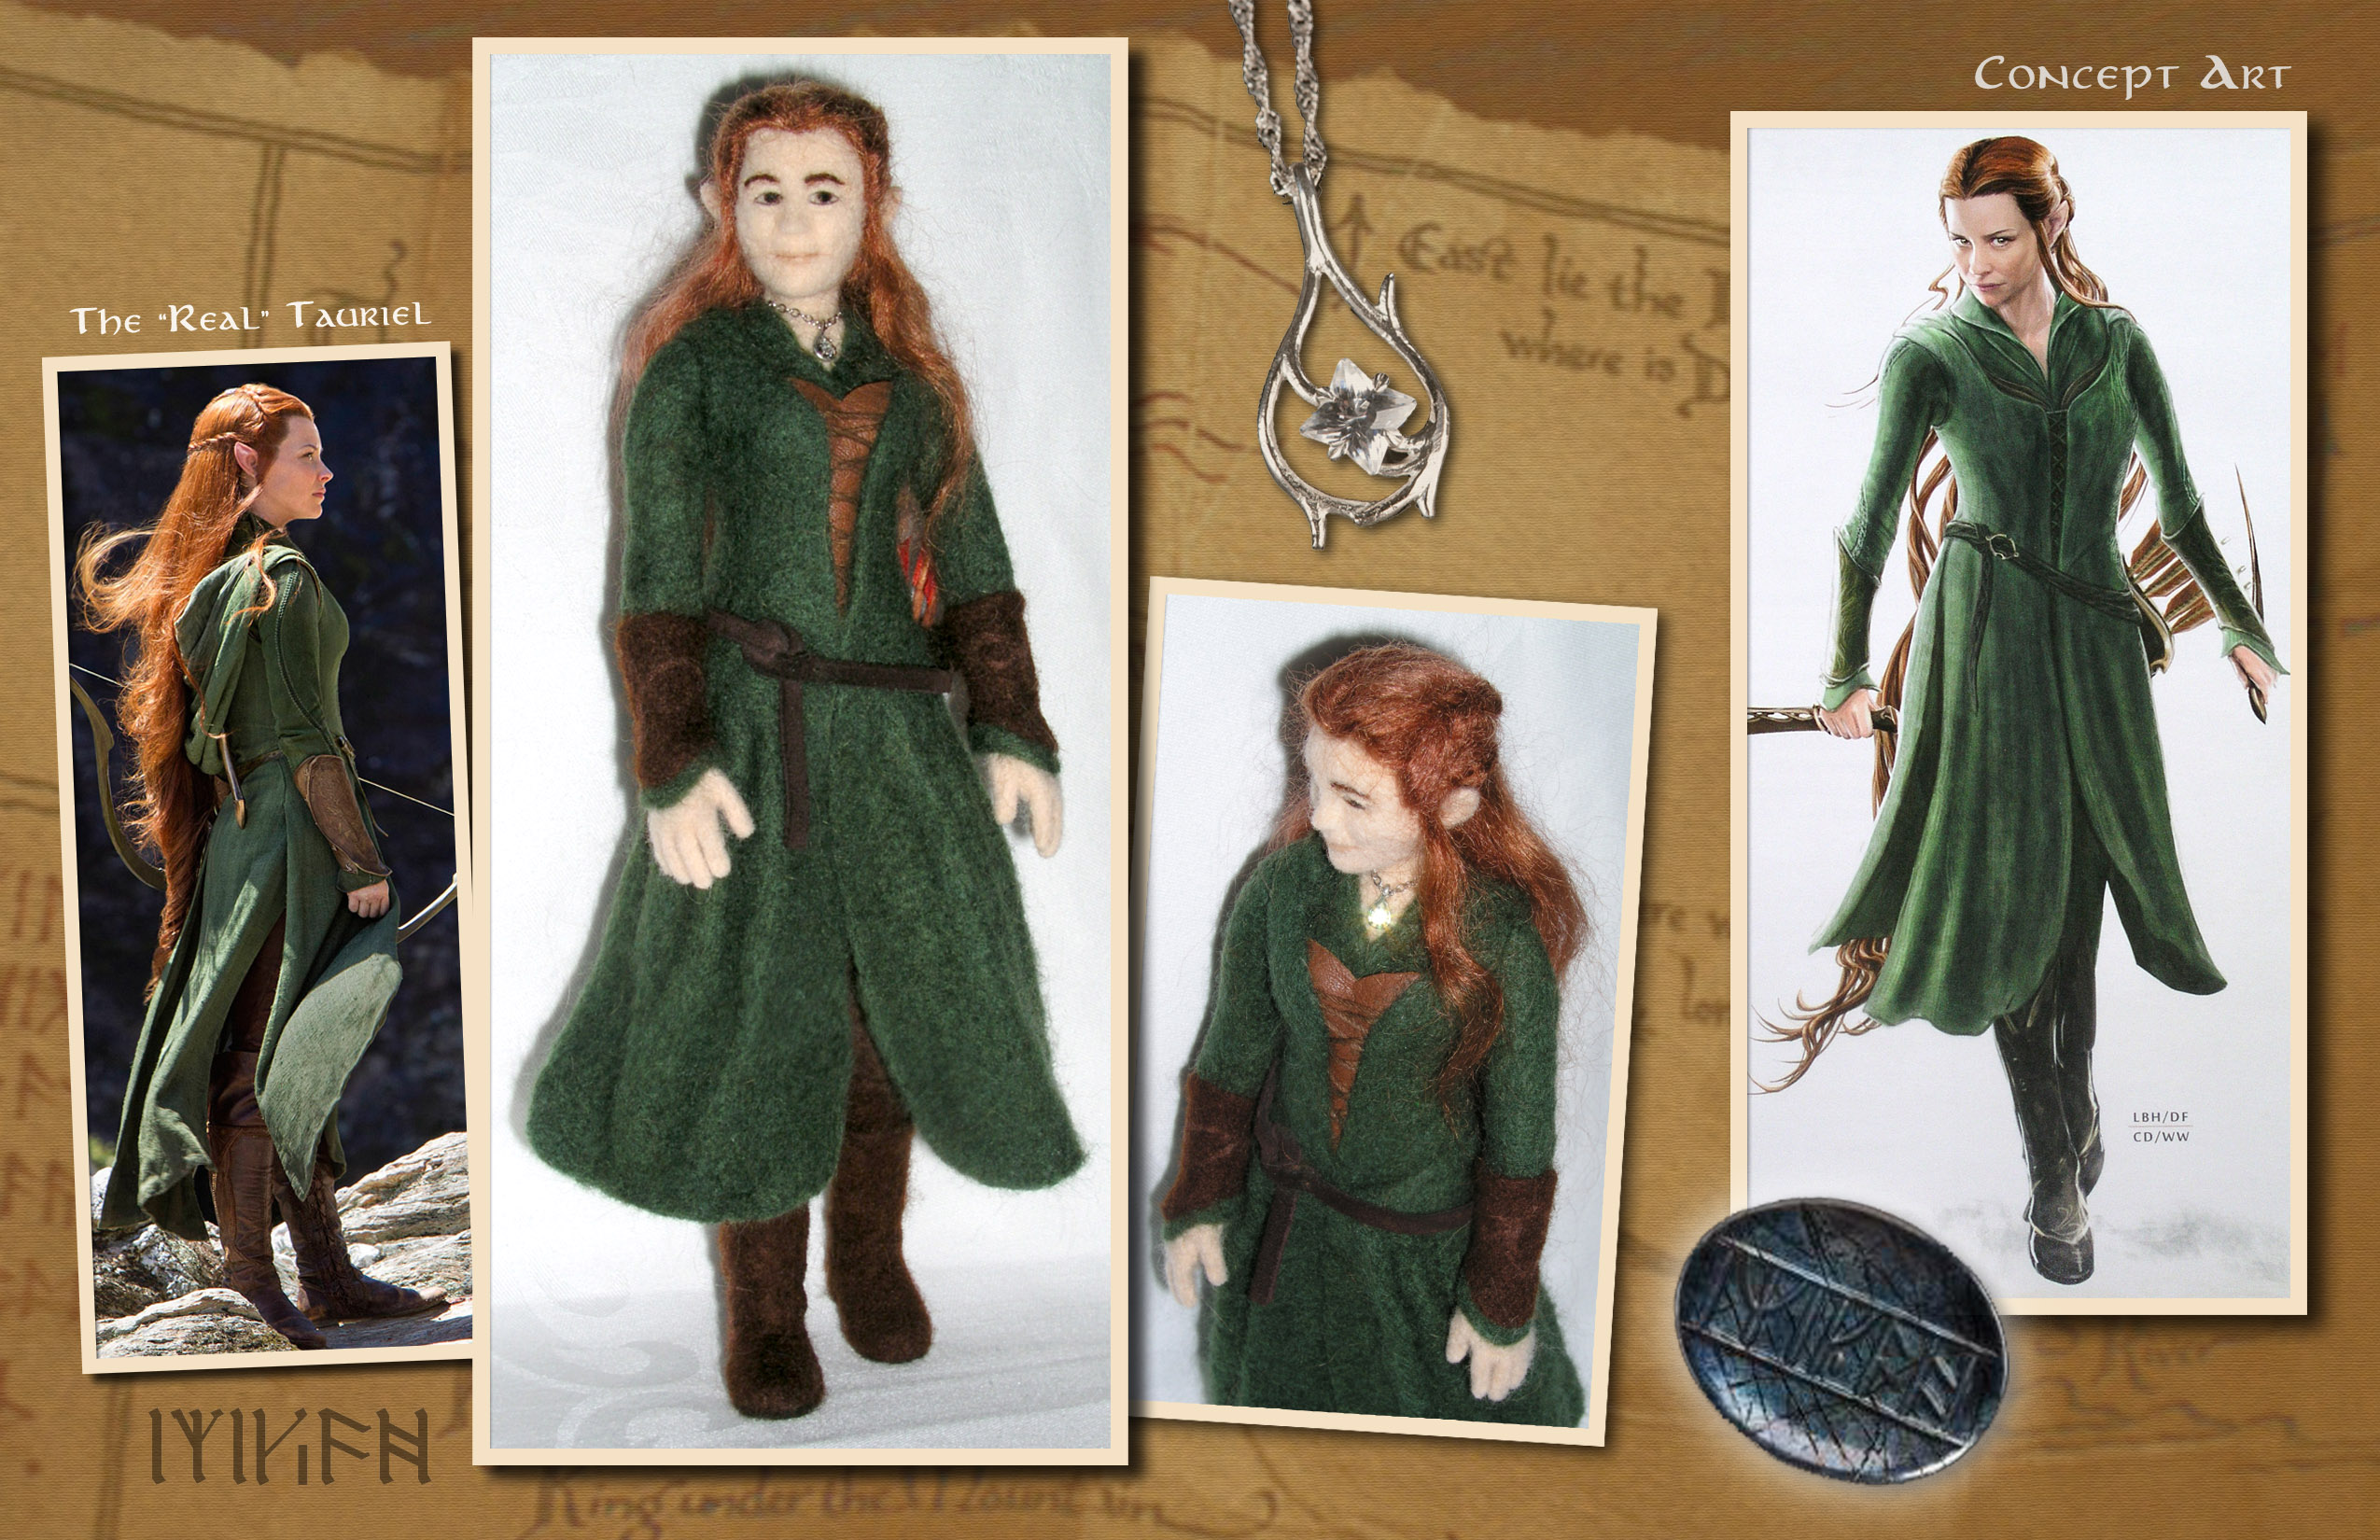 Tauriel Doll show with the Concept Art